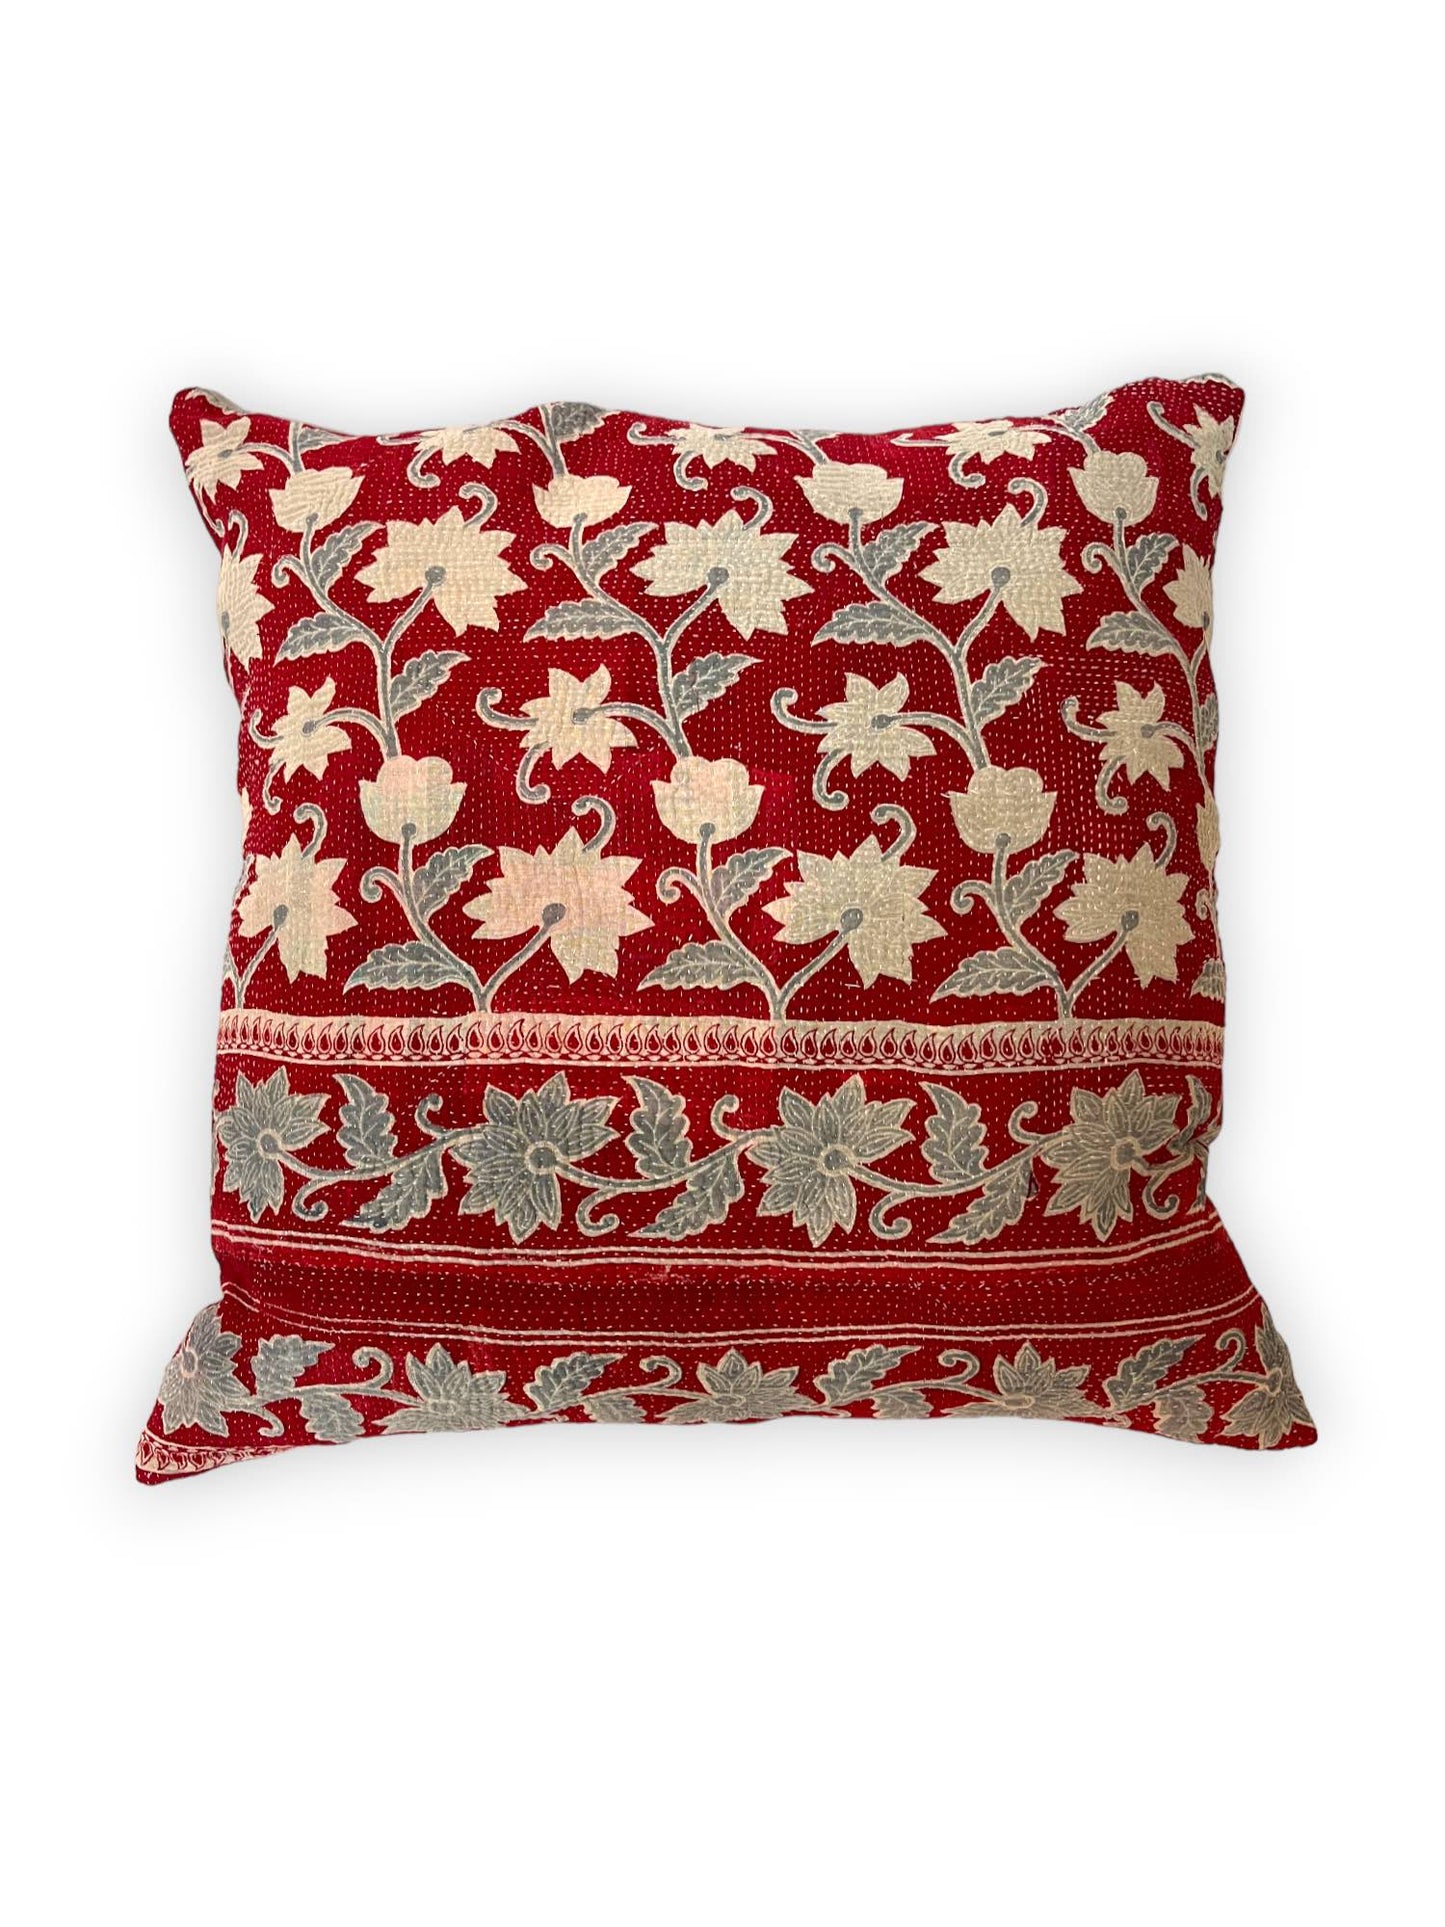 Red and pale blue kantha cushion